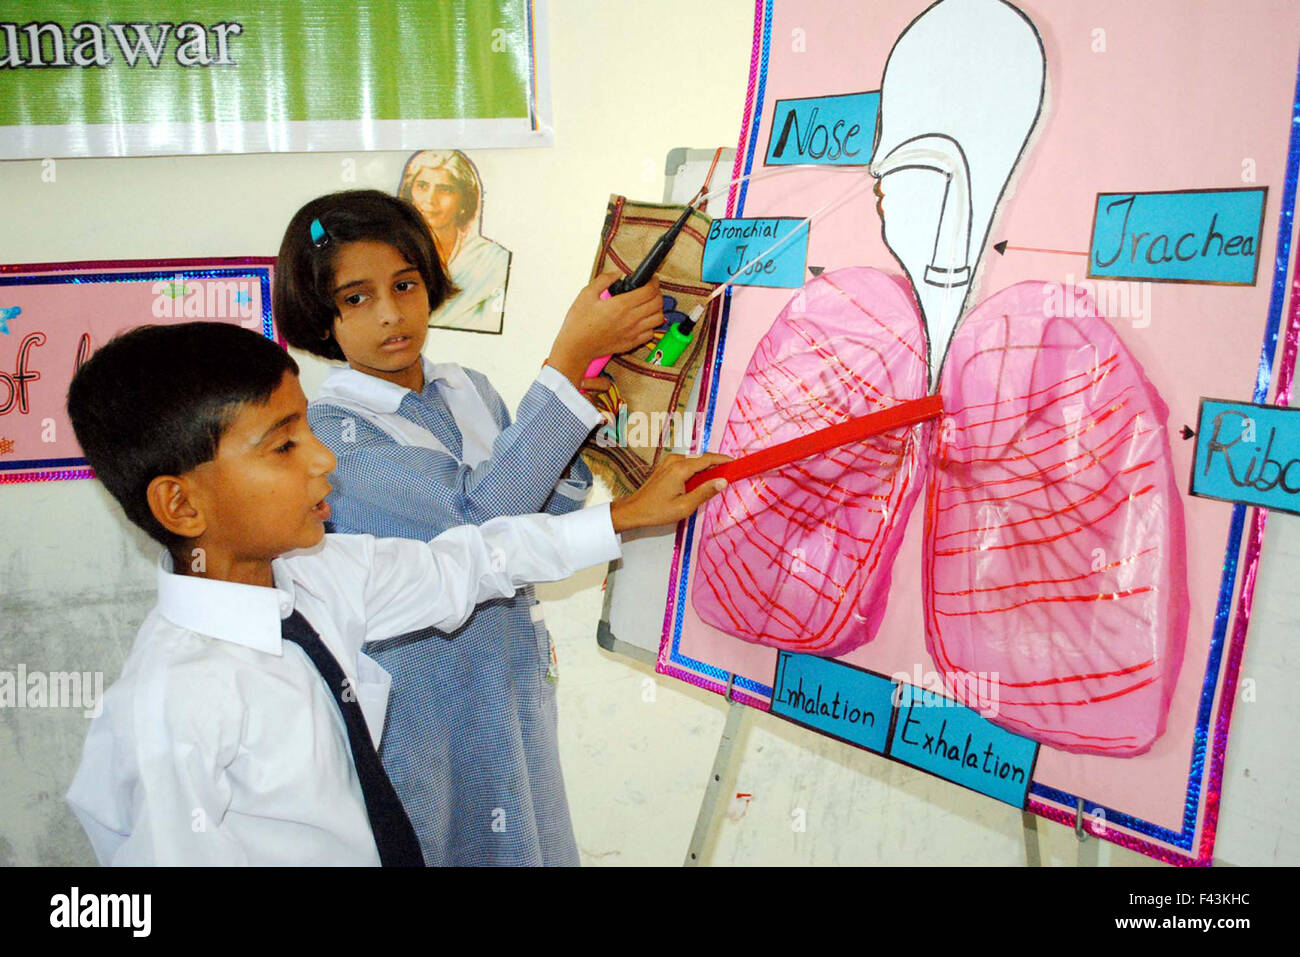 Students take keen interest at stall during Science Exhibition held at local school in Hyderabad on Wednesday, October 14, 2015. Credit:  Asianet-Pakistan/Alamy Live News Stock Photo